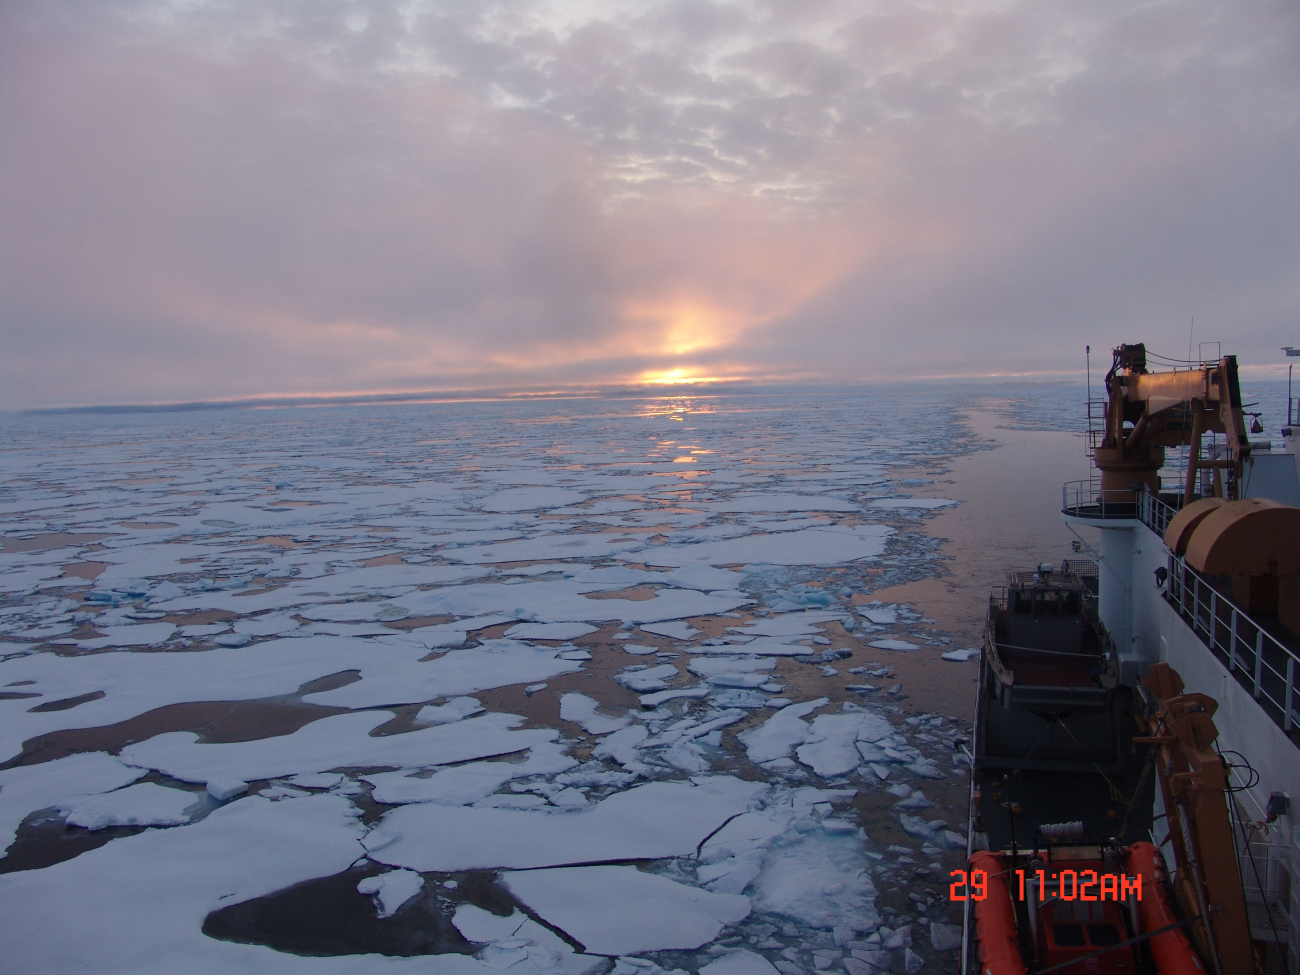 CGC HEALY passing through an extensive field of first year ice